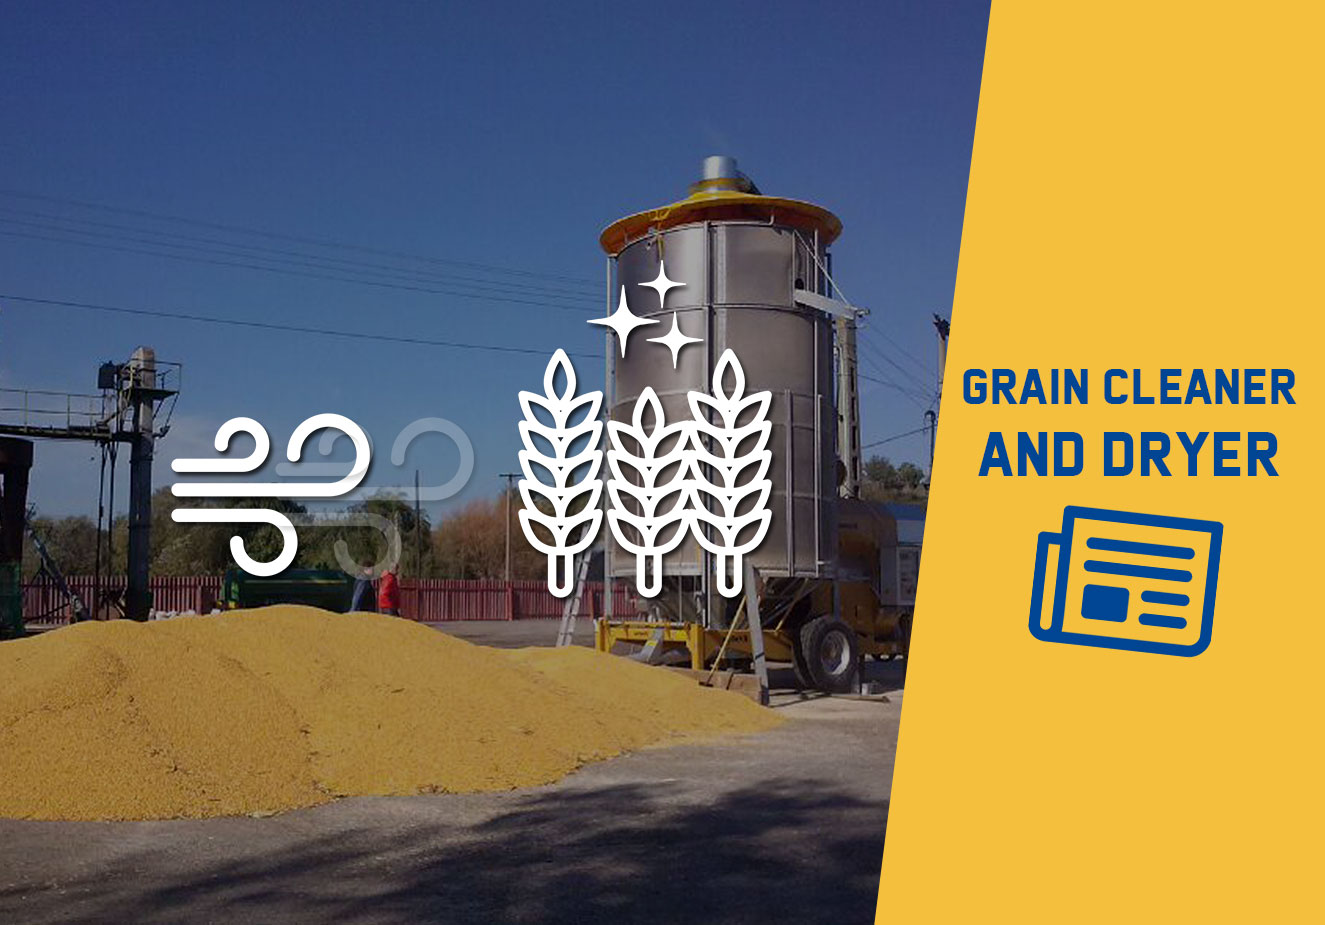 Grain cleaner and dryer in one machine? Check it how it works